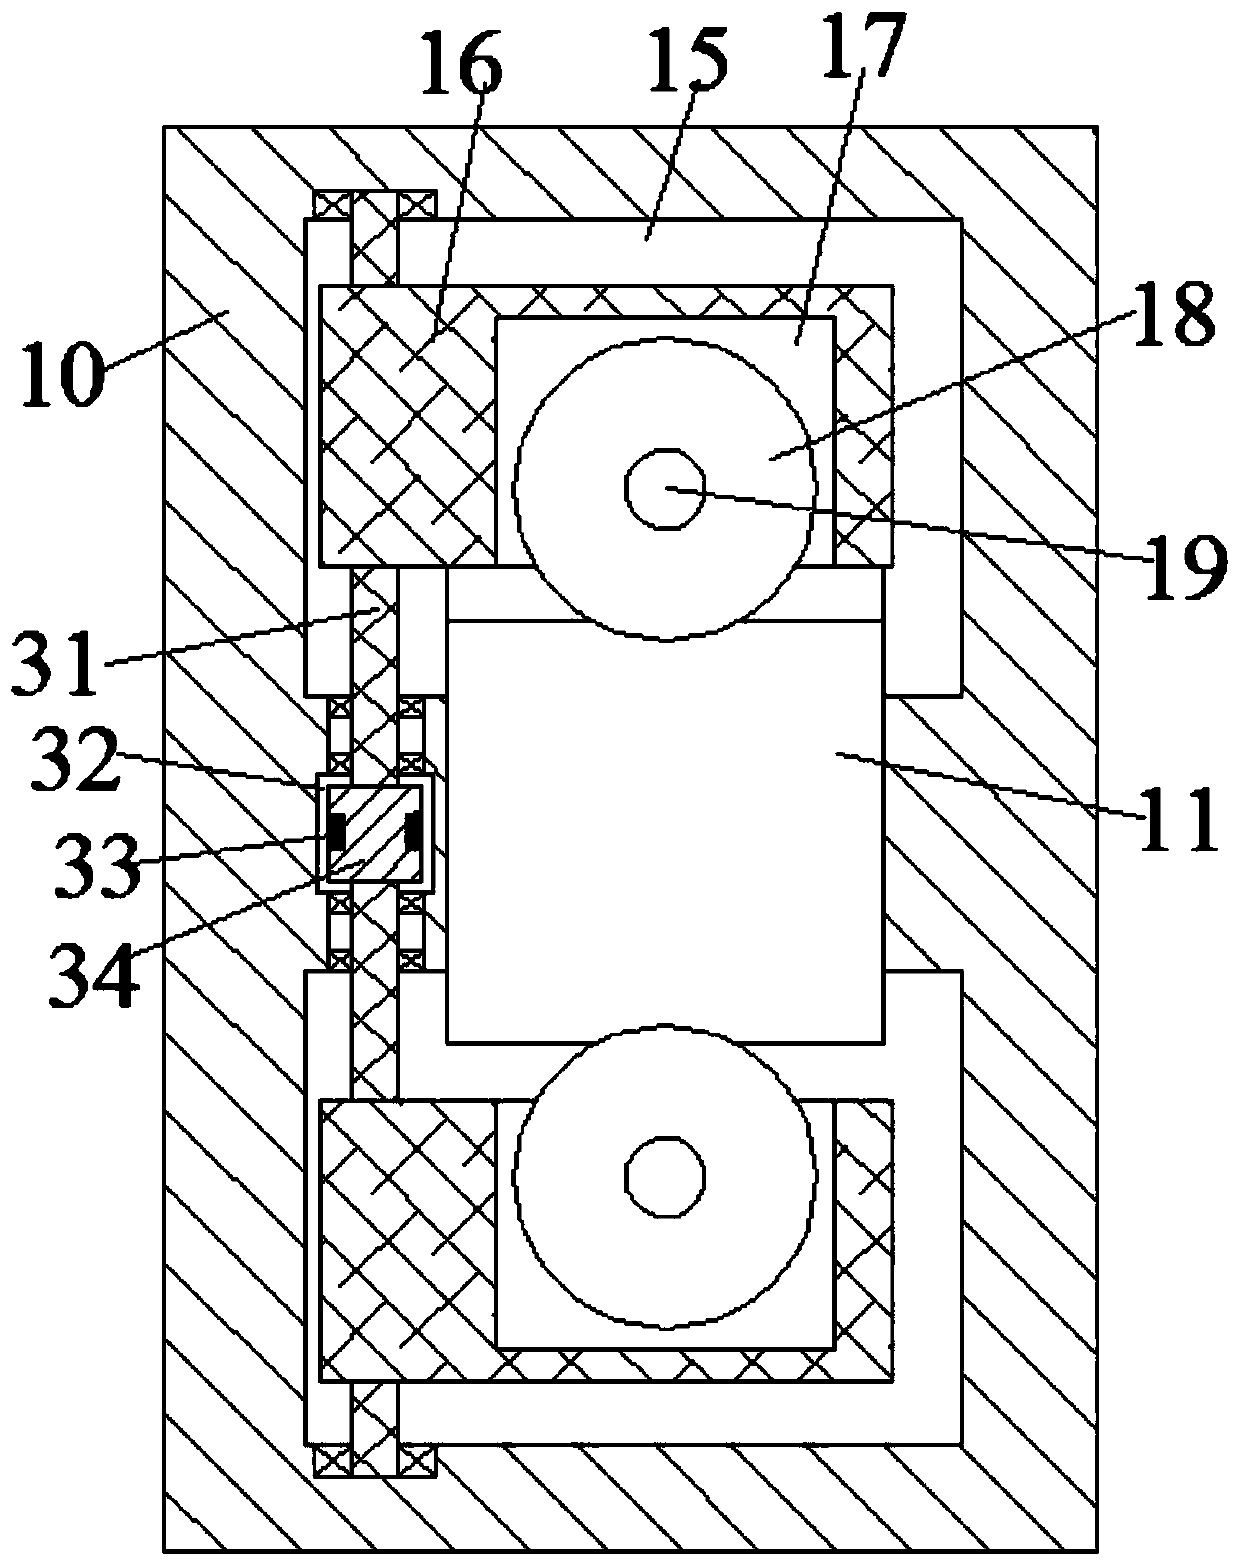 Thin wood chip processing device